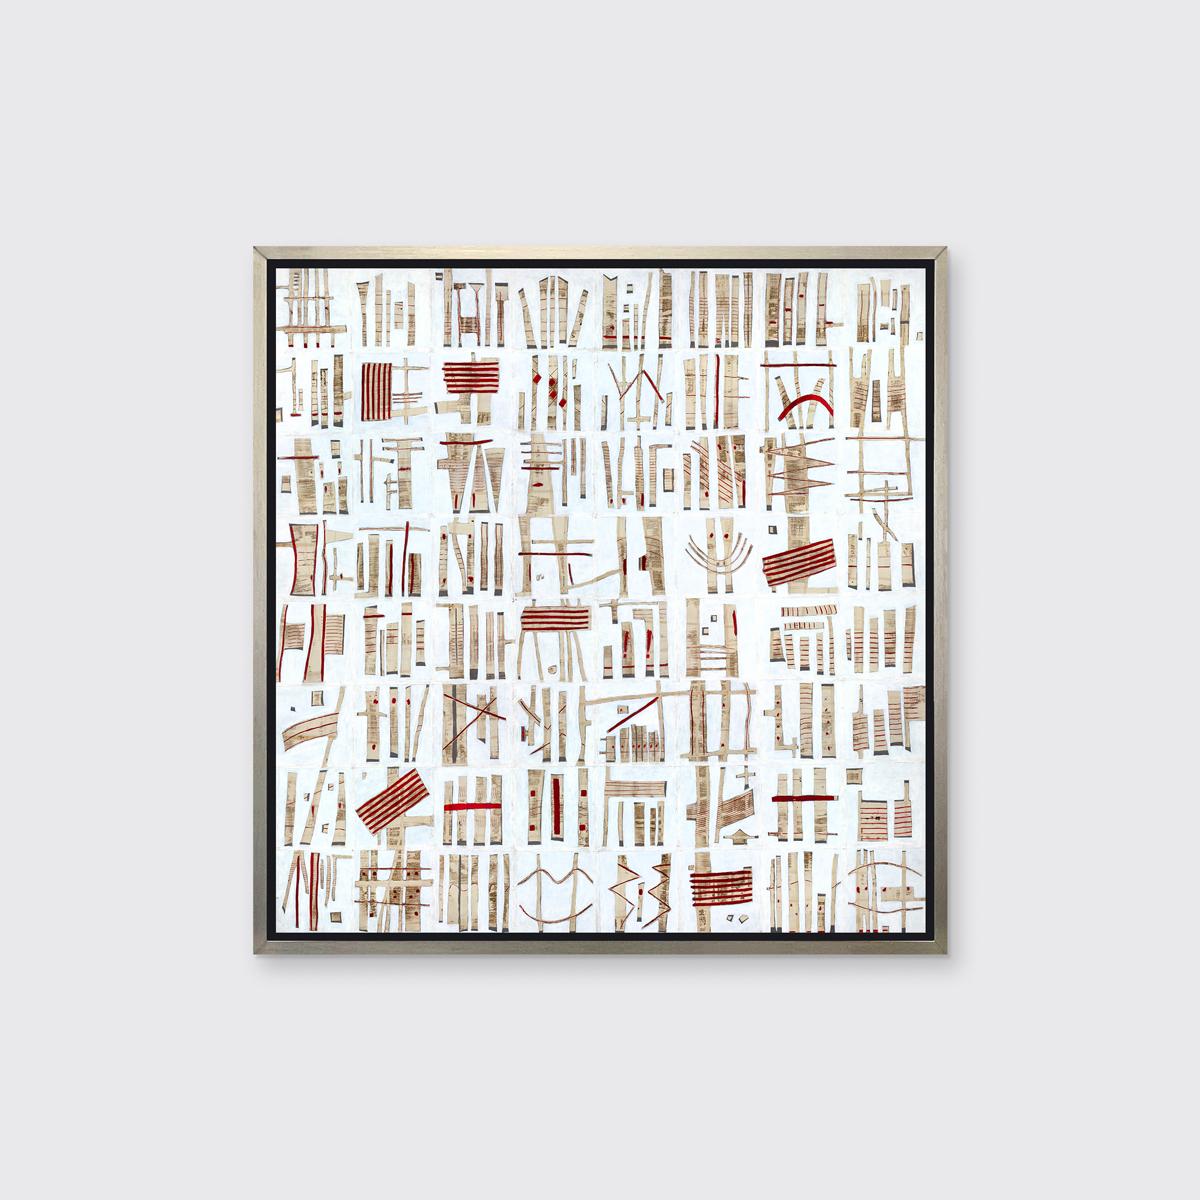 Sofie Swann Abstract Print - "Bedtime Story, " Framed Limited Edition Giclee Print, 48" x 48"